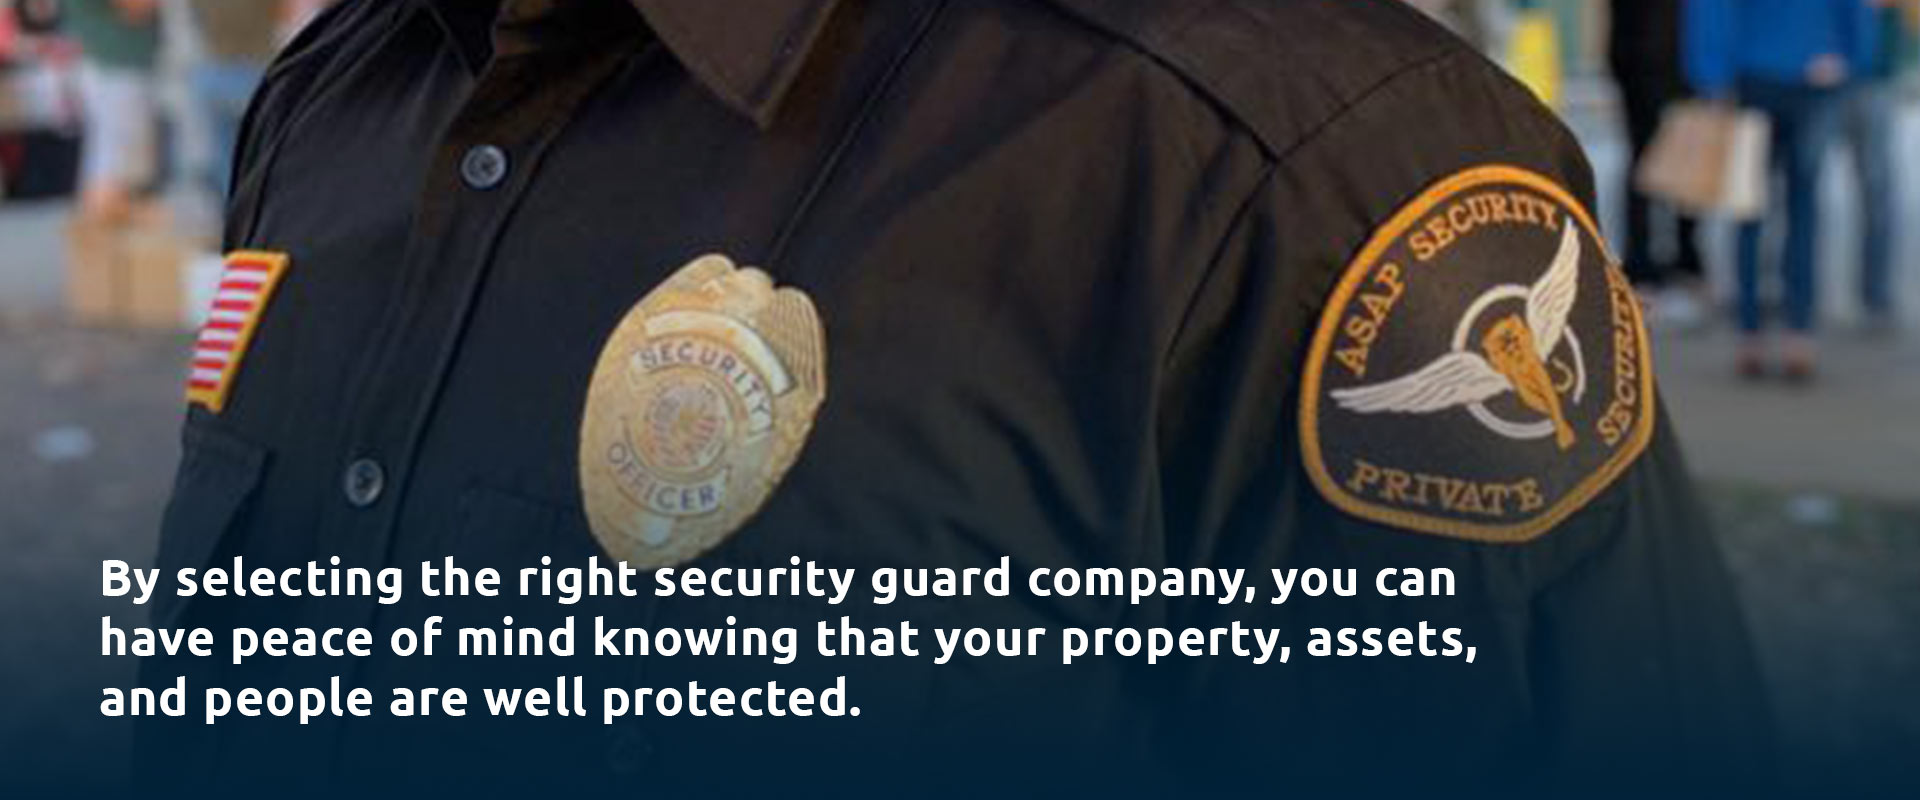 Hire The Right Security Guard Company for your business